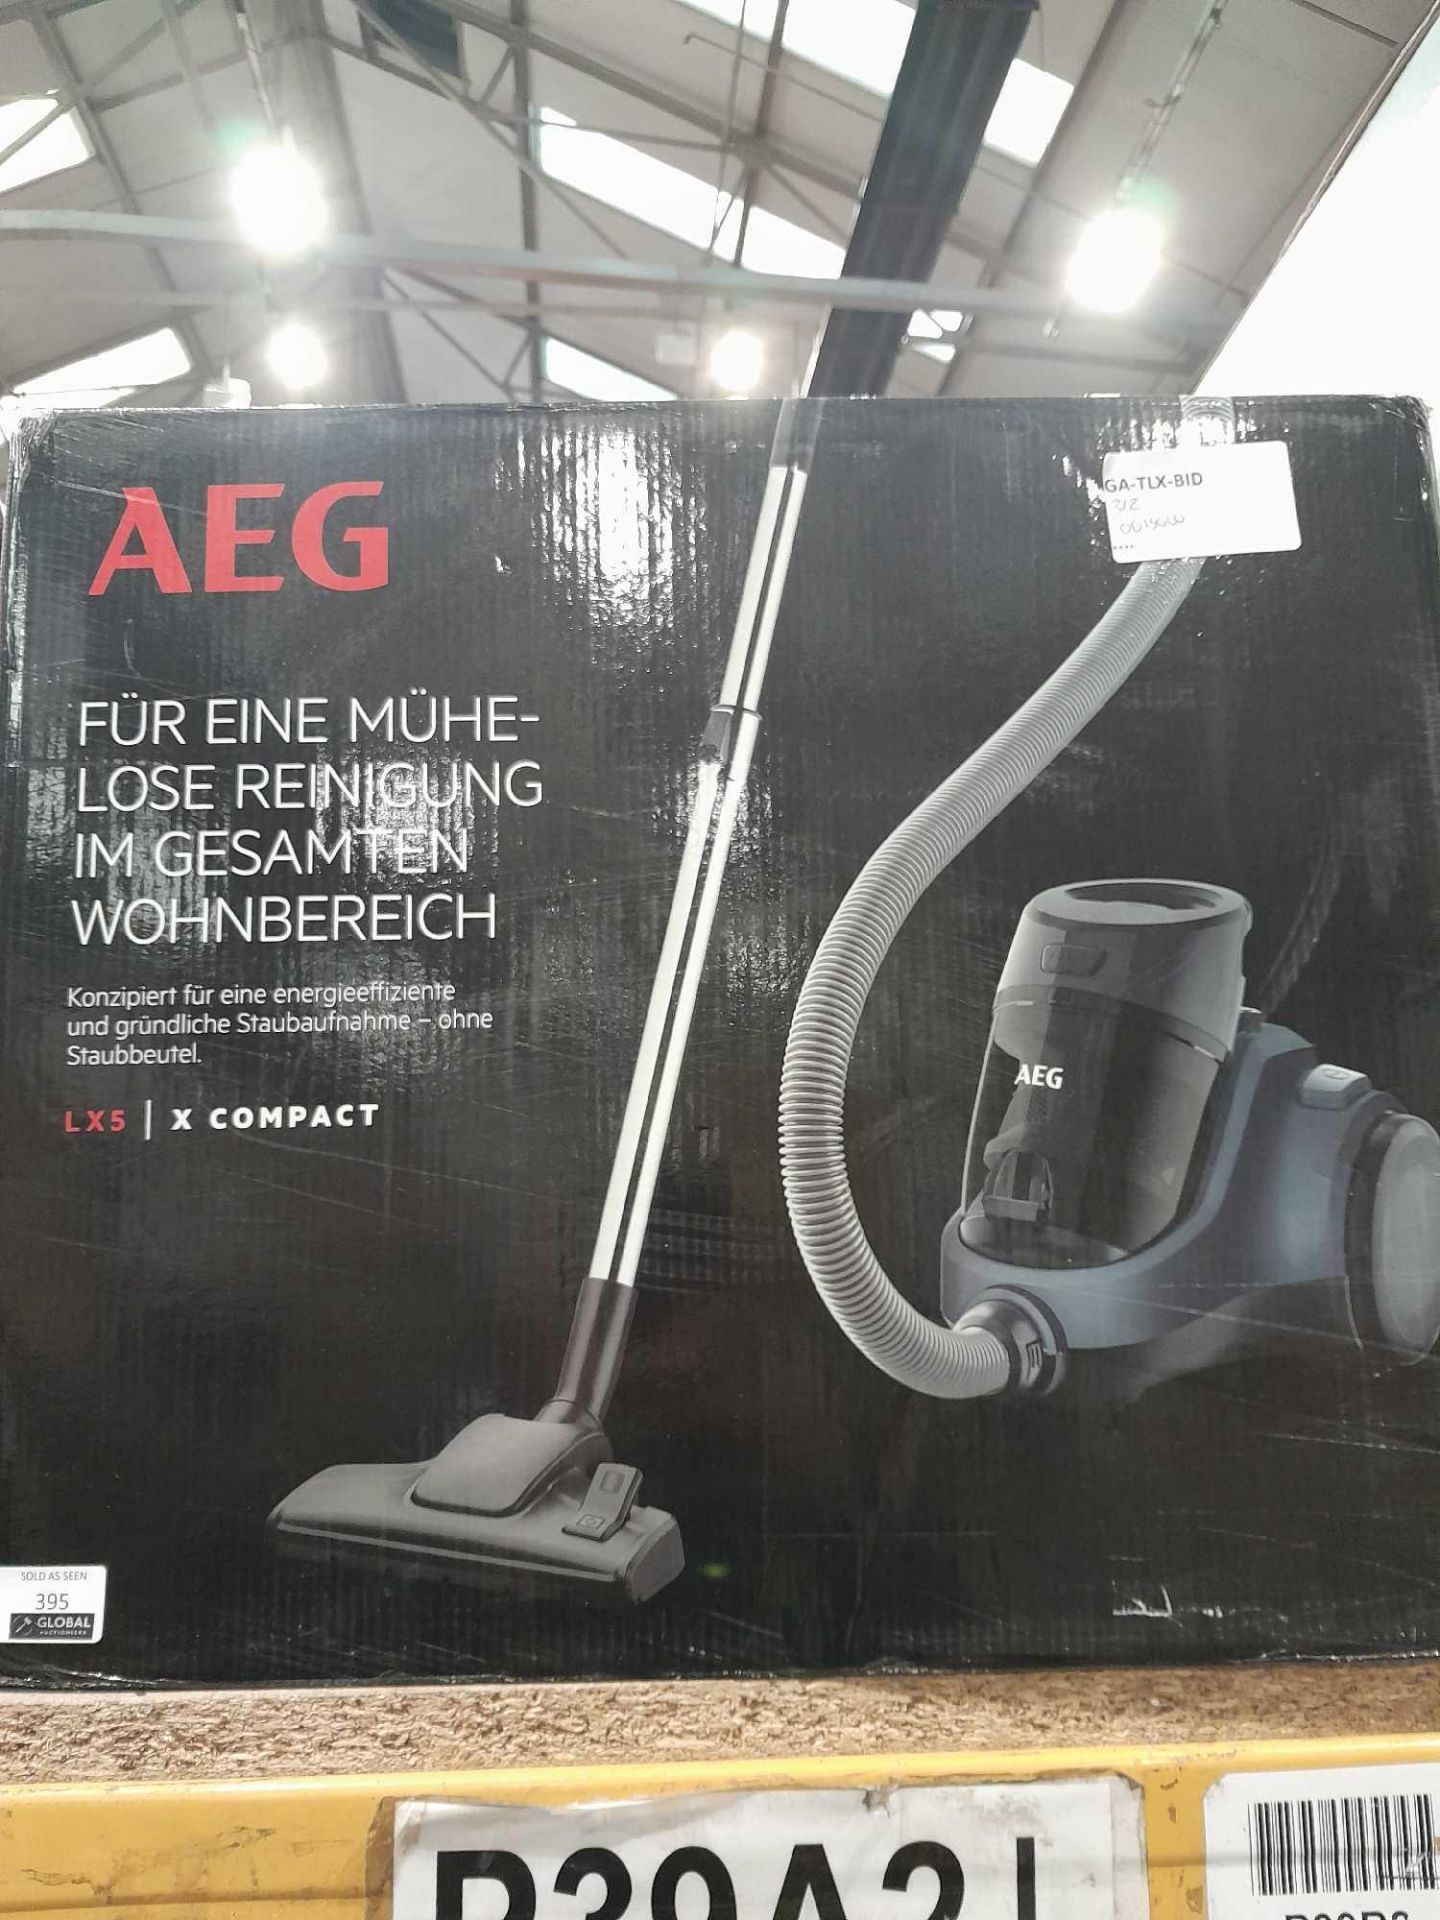 RRP £150 Boxed Aeg Lx5 Compact Vacuum Cleaner - Image 2 of 2